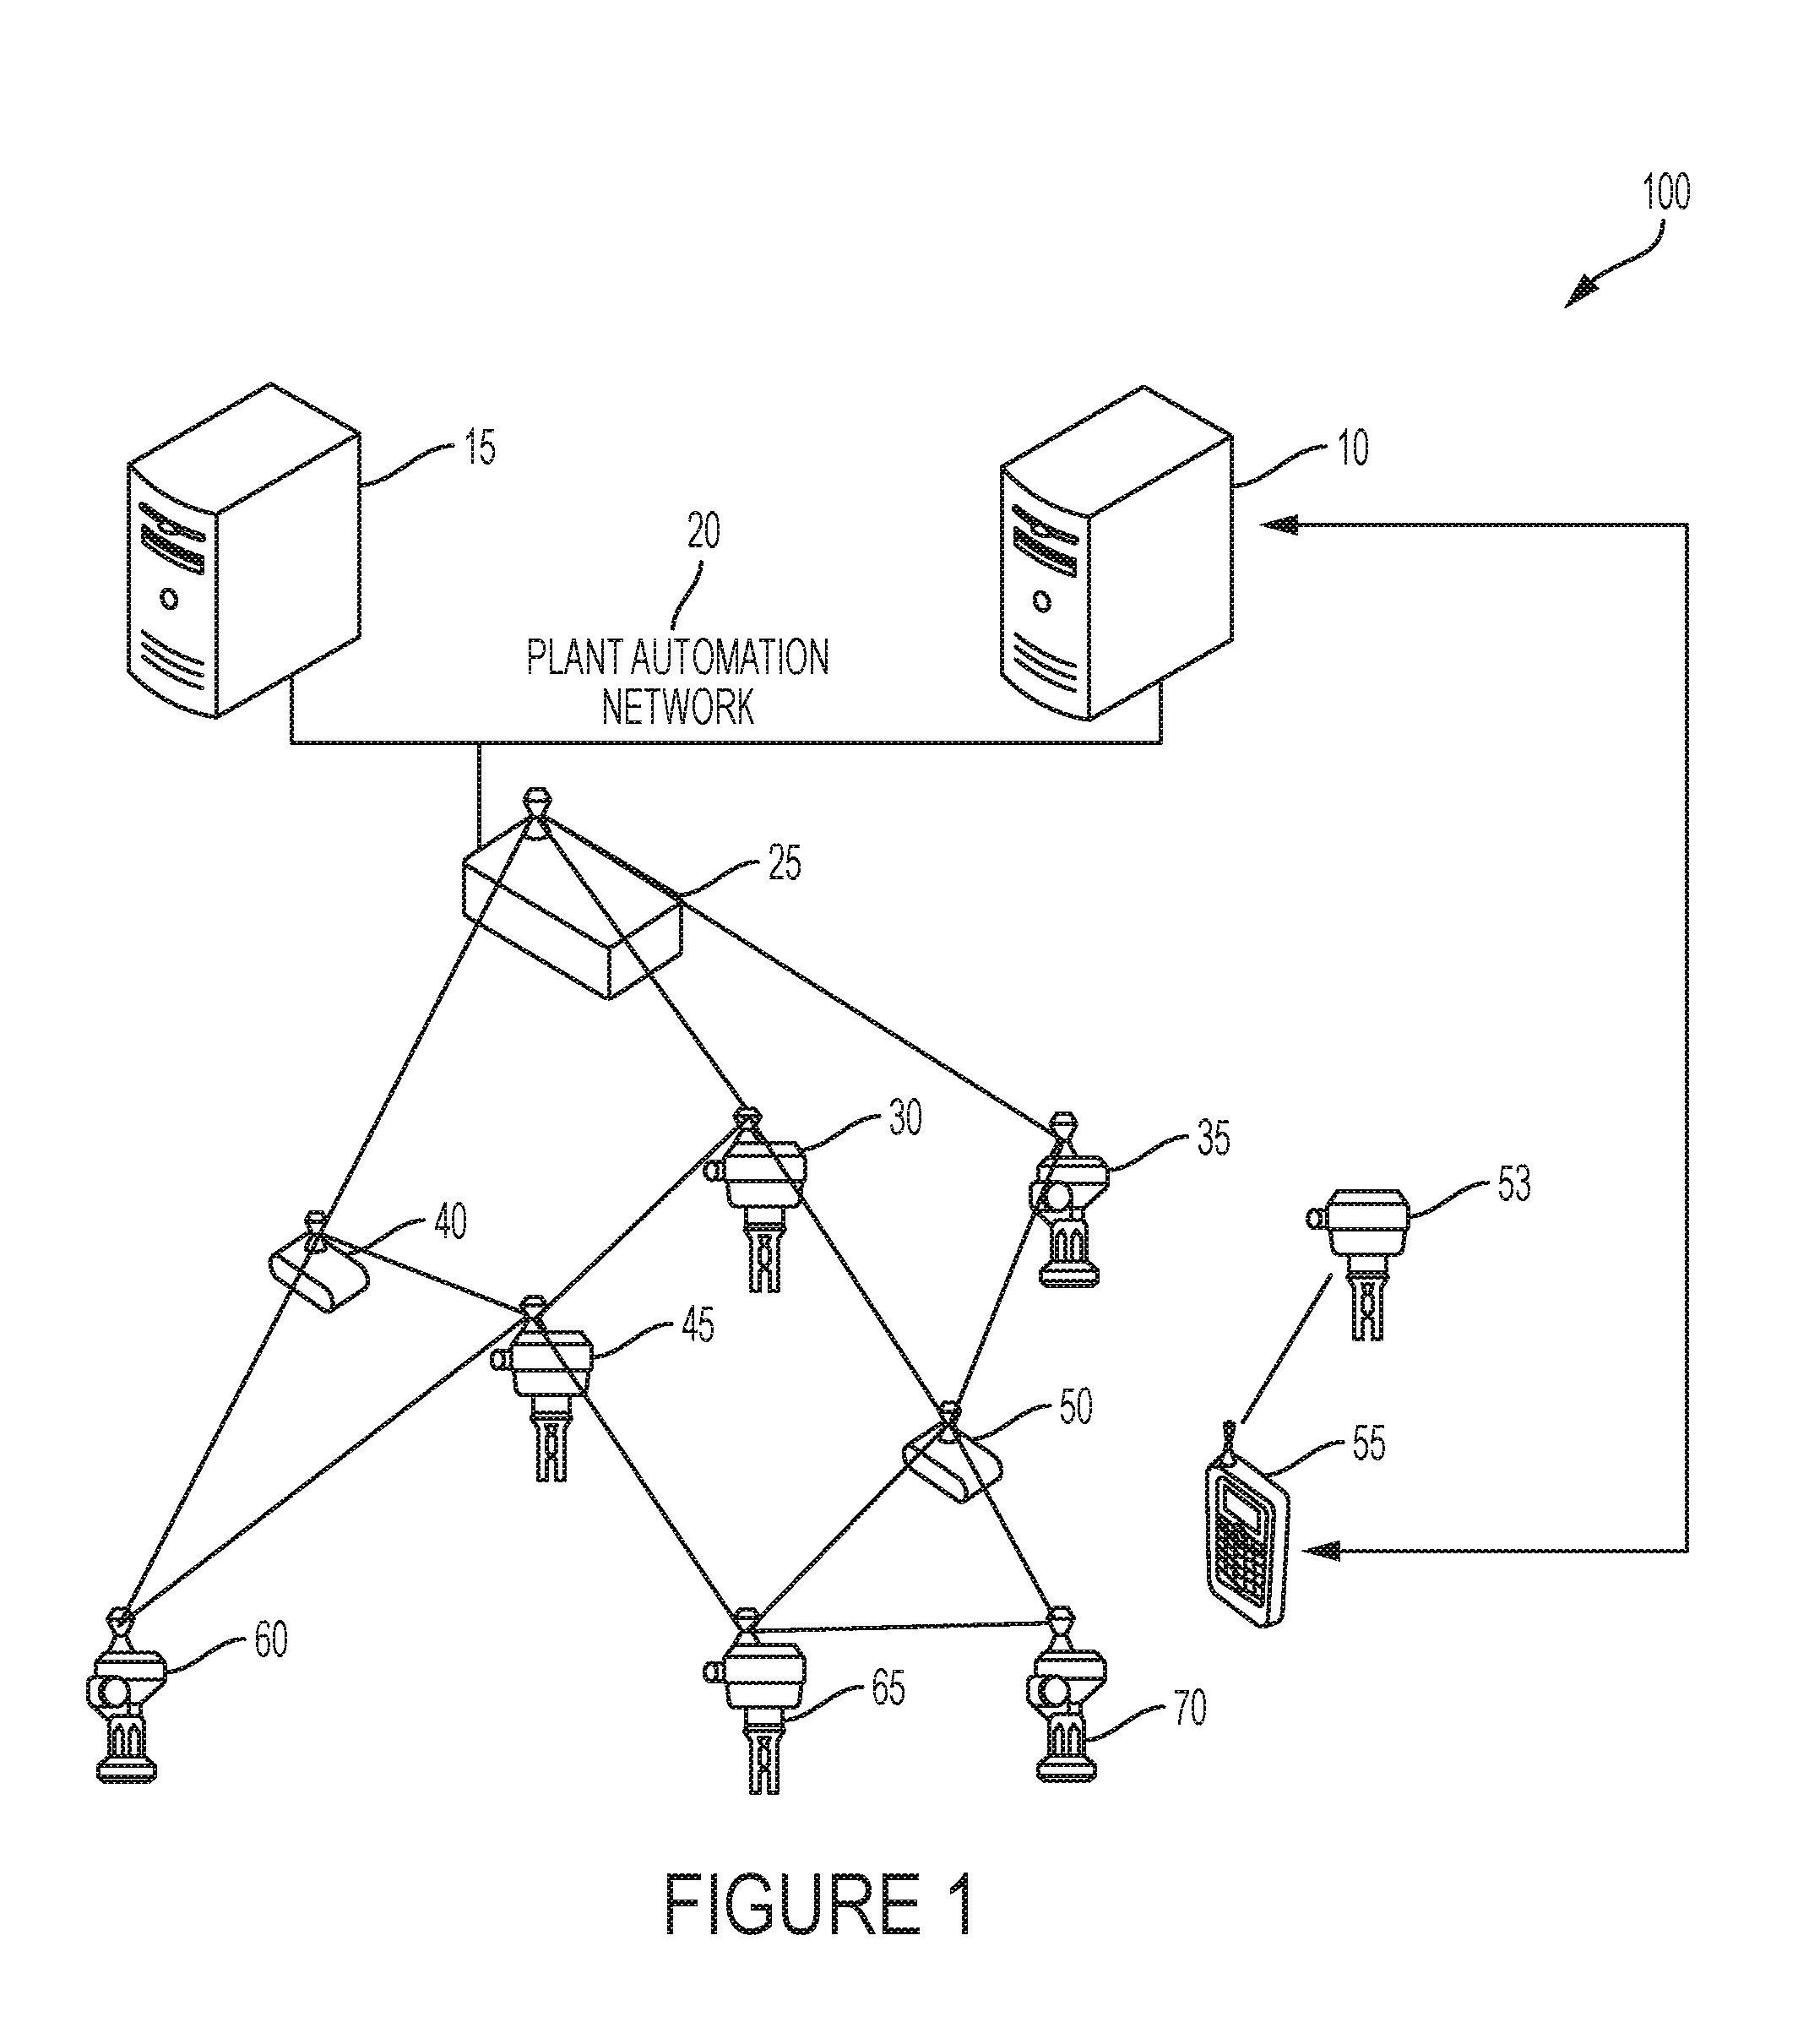 Method for commissioning and joining of a field device to a network